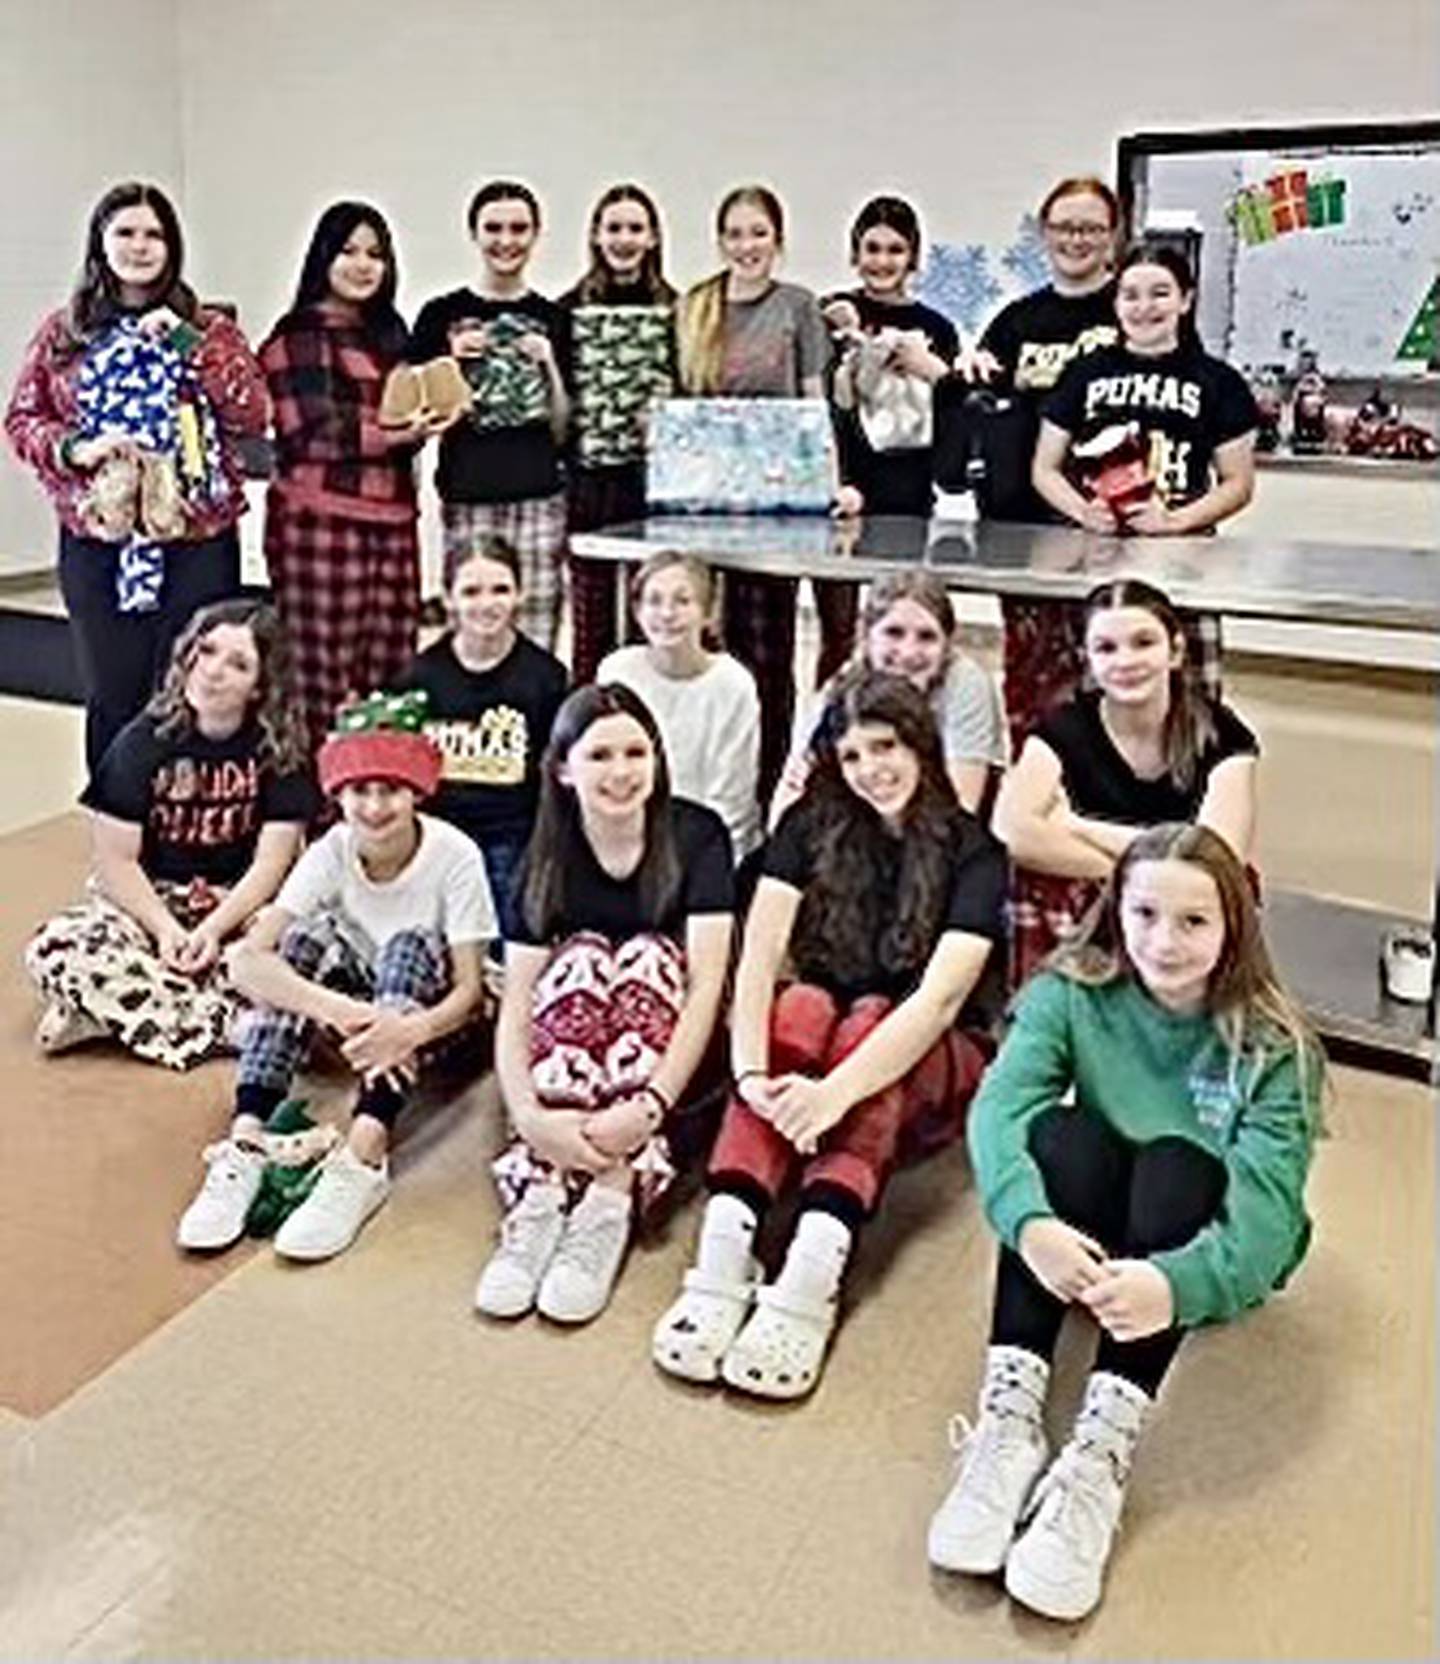 The PCJH cheerleaders are spreading Christmas cheer this holiday season.  They wrapped up some warm pajamas and cozy slippers for five kids that are spending Christmas at IV Pads. Pictured are (front row, from left to right) Kynzie Thomas, Brooklyn Gorski, Naomi Hammerich and Jolene Poole; (middle row) Tessa Gerling, Savannah Grasser, Shelby Willard, Eden  Carlson andSarah Schennum; and (back row) Makenzie Setters, Alicia Vasquez-Barrares, Sofia Borri, Avery Grasser, Piper Terando, Ella Schrowang, Samantha Marciniak and Aurora Bickerman. Not Pictured: Laci Lemke.